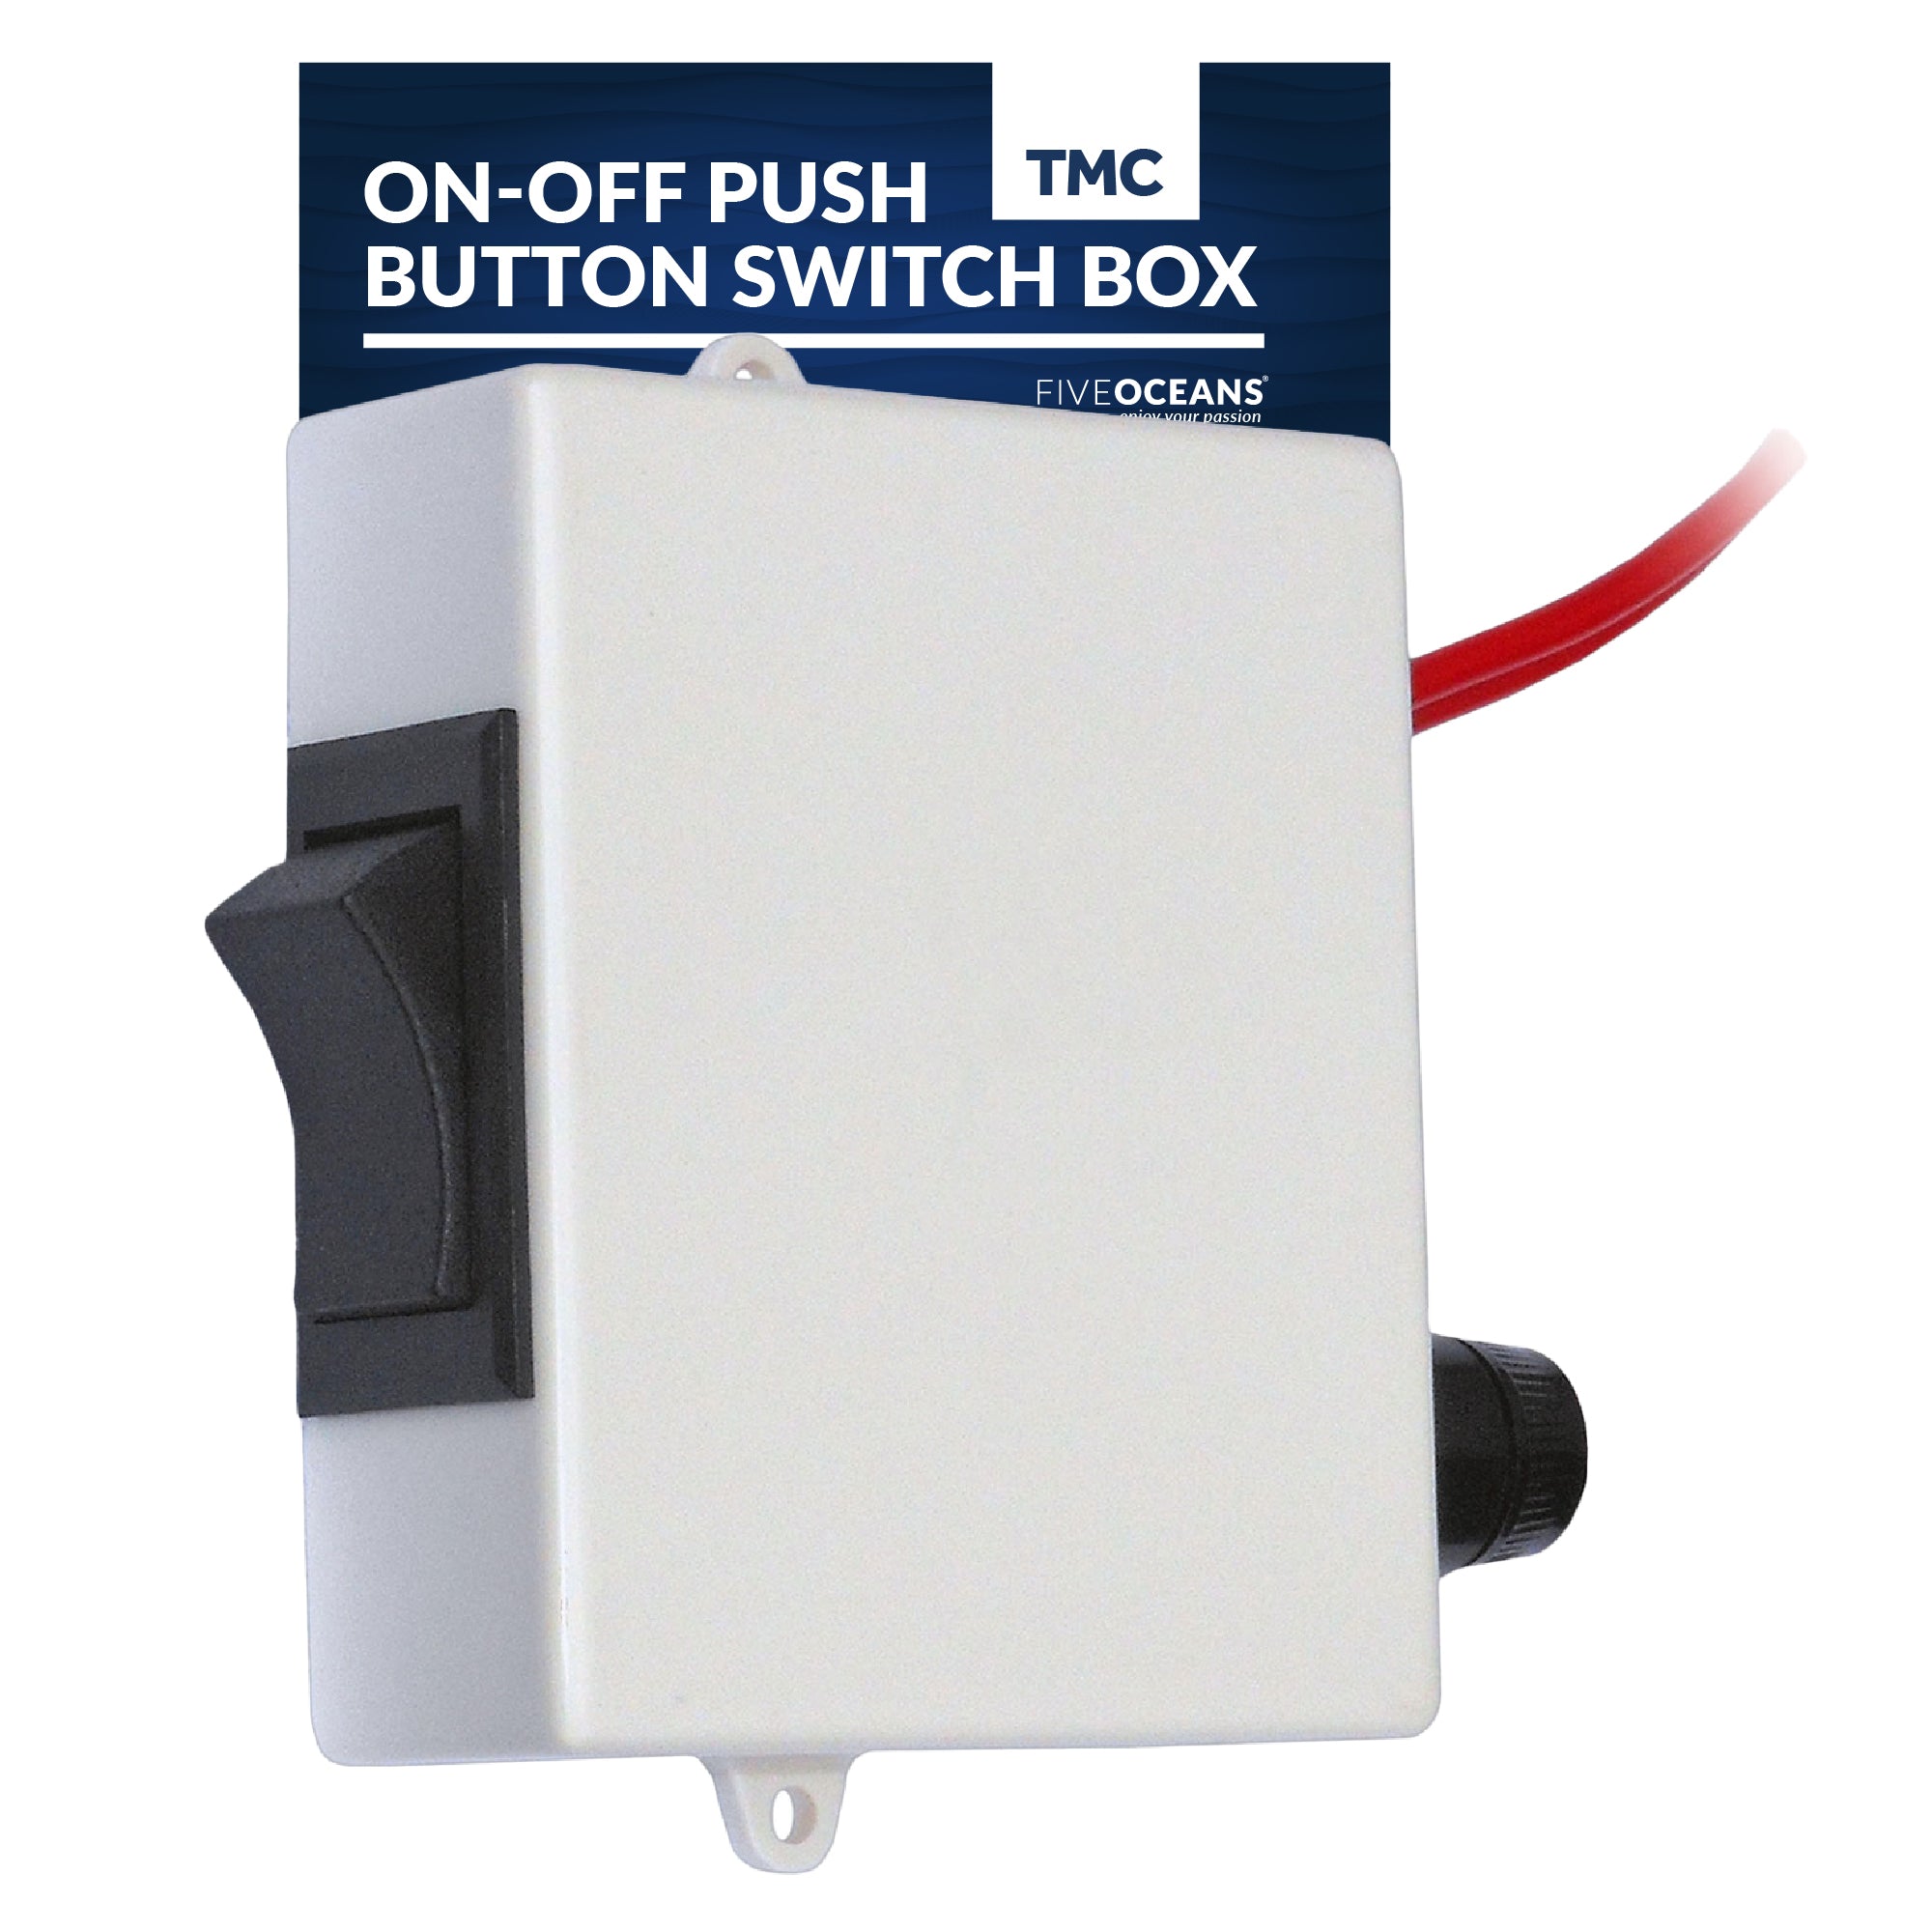 TMC Electric Toliet Momentary On-Off Push Button Switch Box - FO729